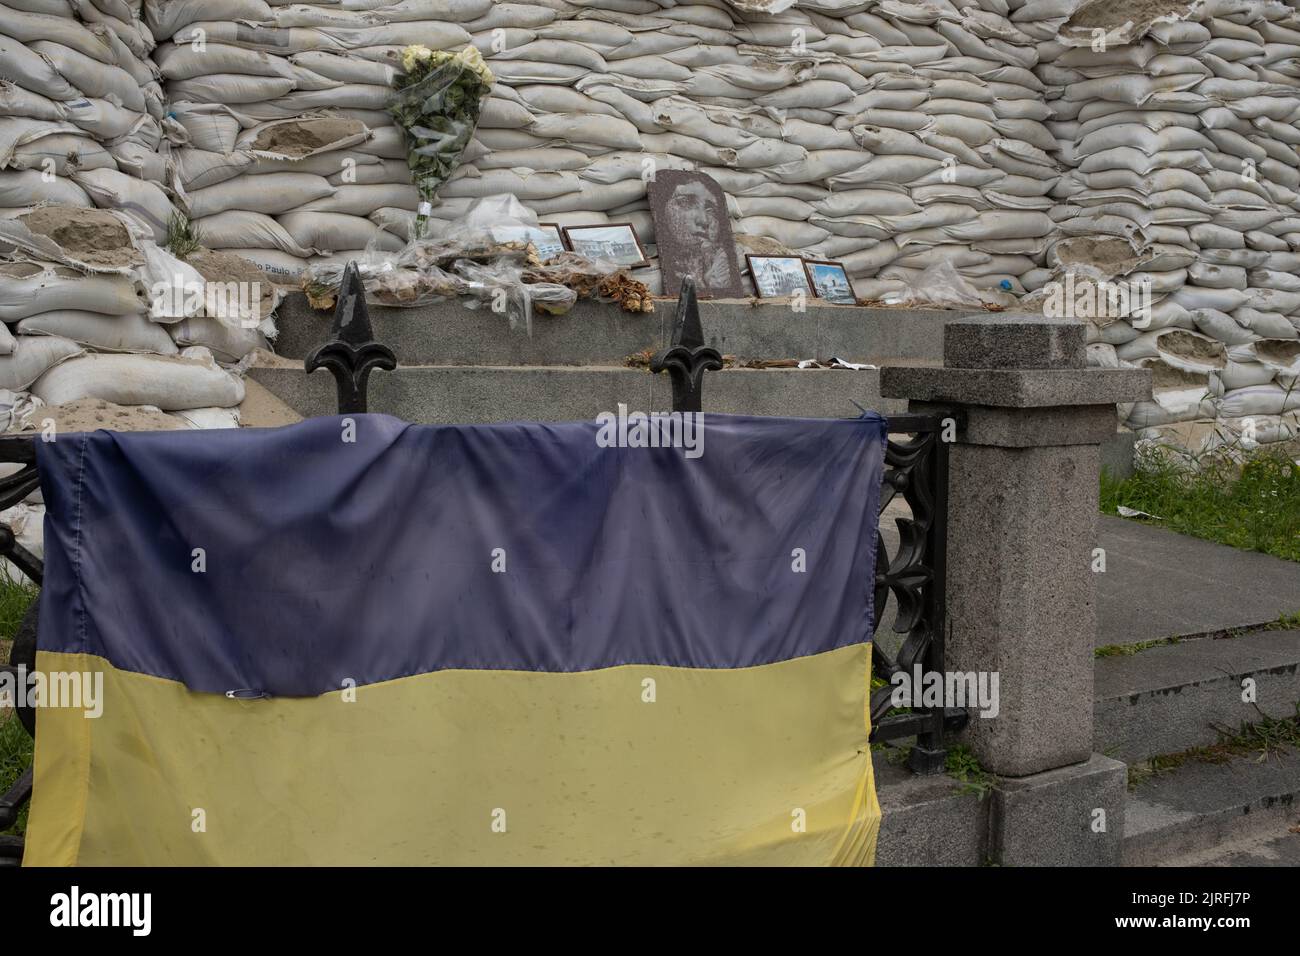 Monument covered in sandbags for protection, during the war caused by Russian invasion, in Kyiv, Ukraine, 19 July 2022. Stock Photo